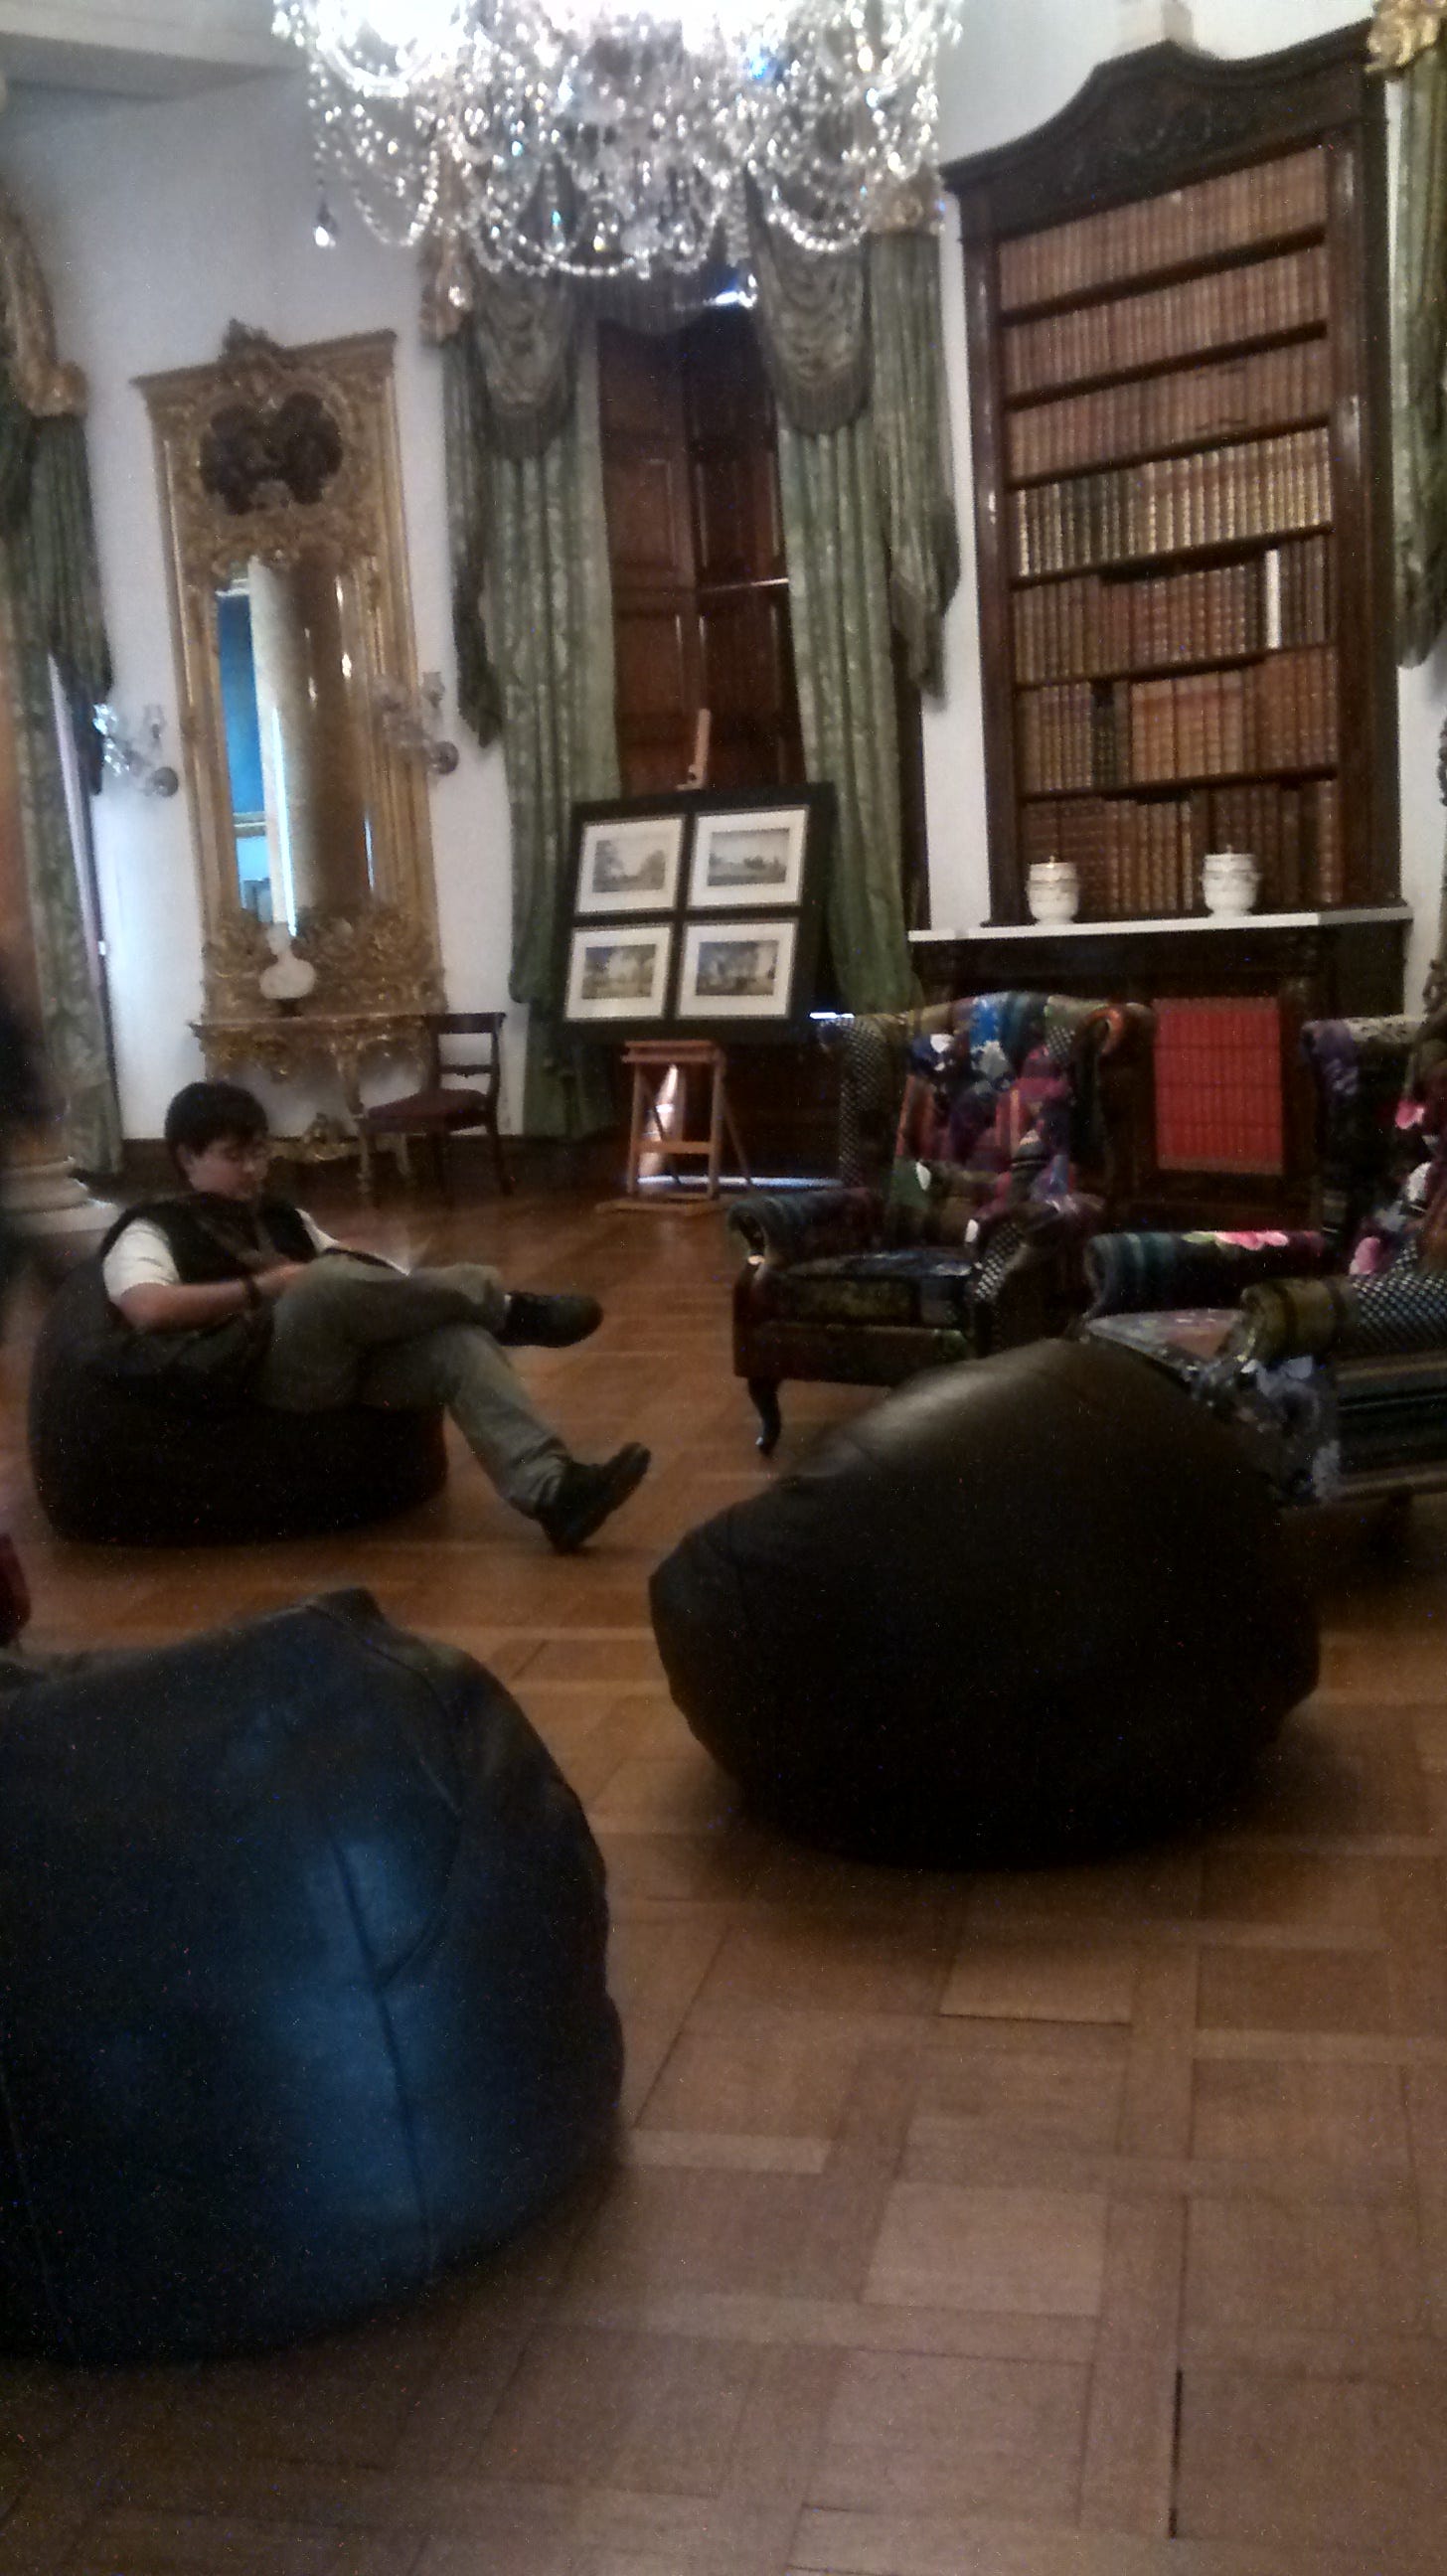 Grand library with bean bag chairs